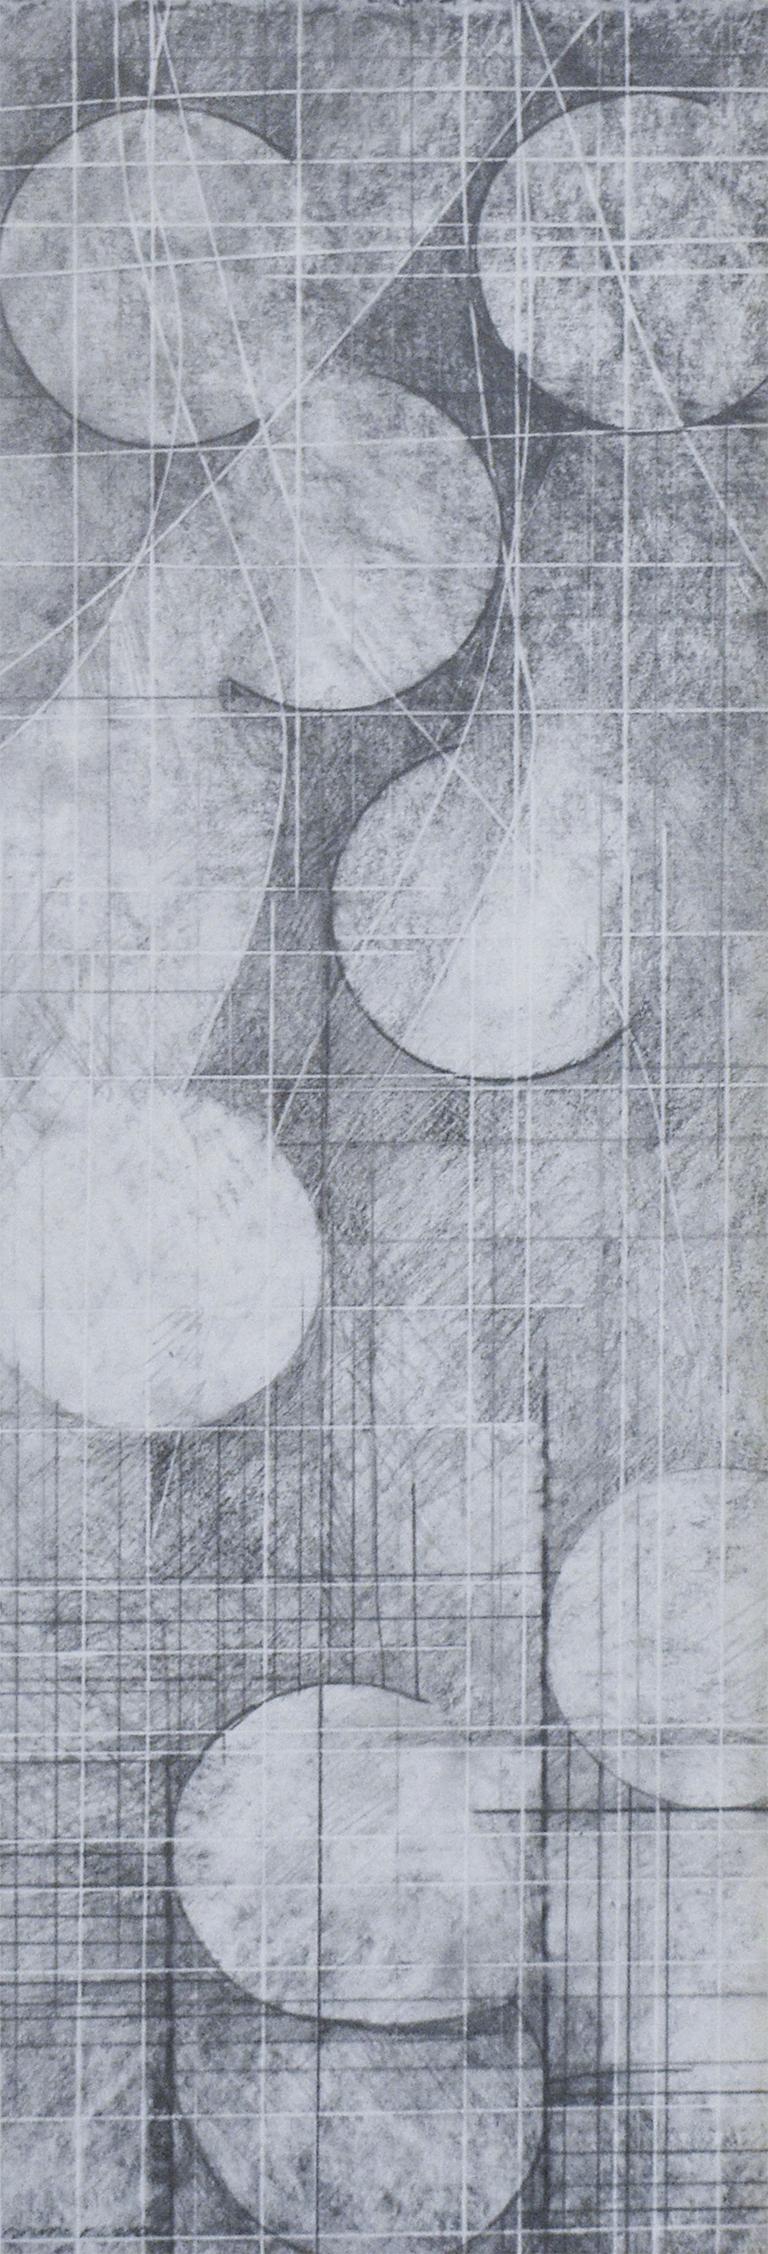 Moons of Jupiter (Study I): Black and White Abstract Geometric Graphite Drawing - Art by David Dew Bruner